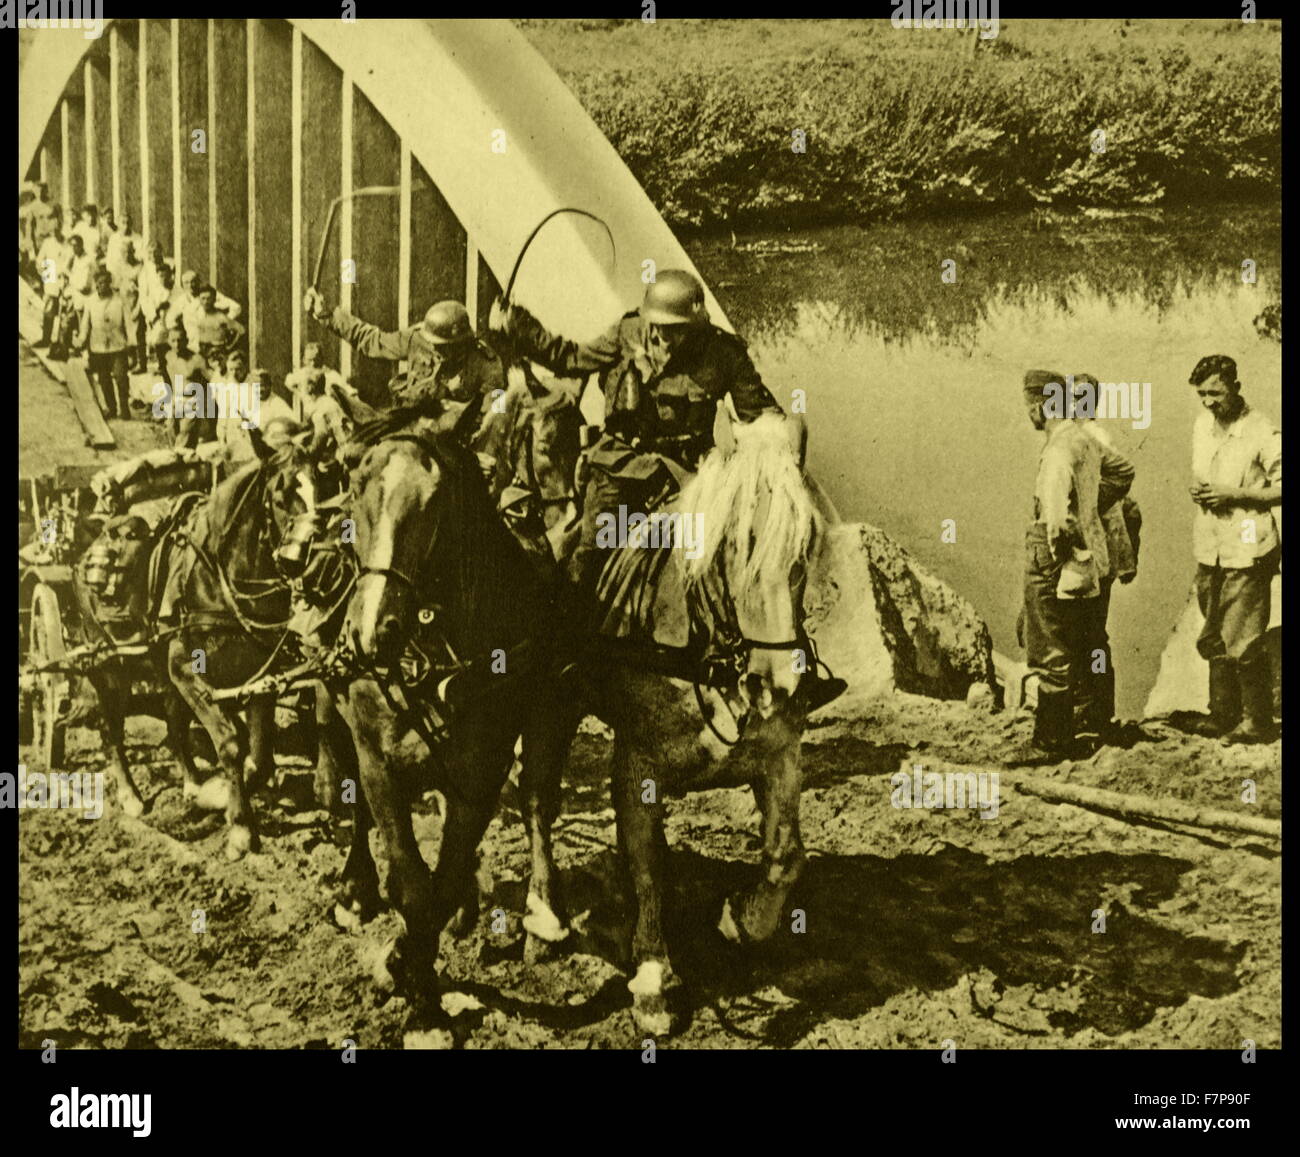 German forces advancing through Poland, towards Warsaw. German troops are shown crossing a bridge with horse and carriage, while Polish prisoners of war closely follow. Dated 1939. Stock Photo